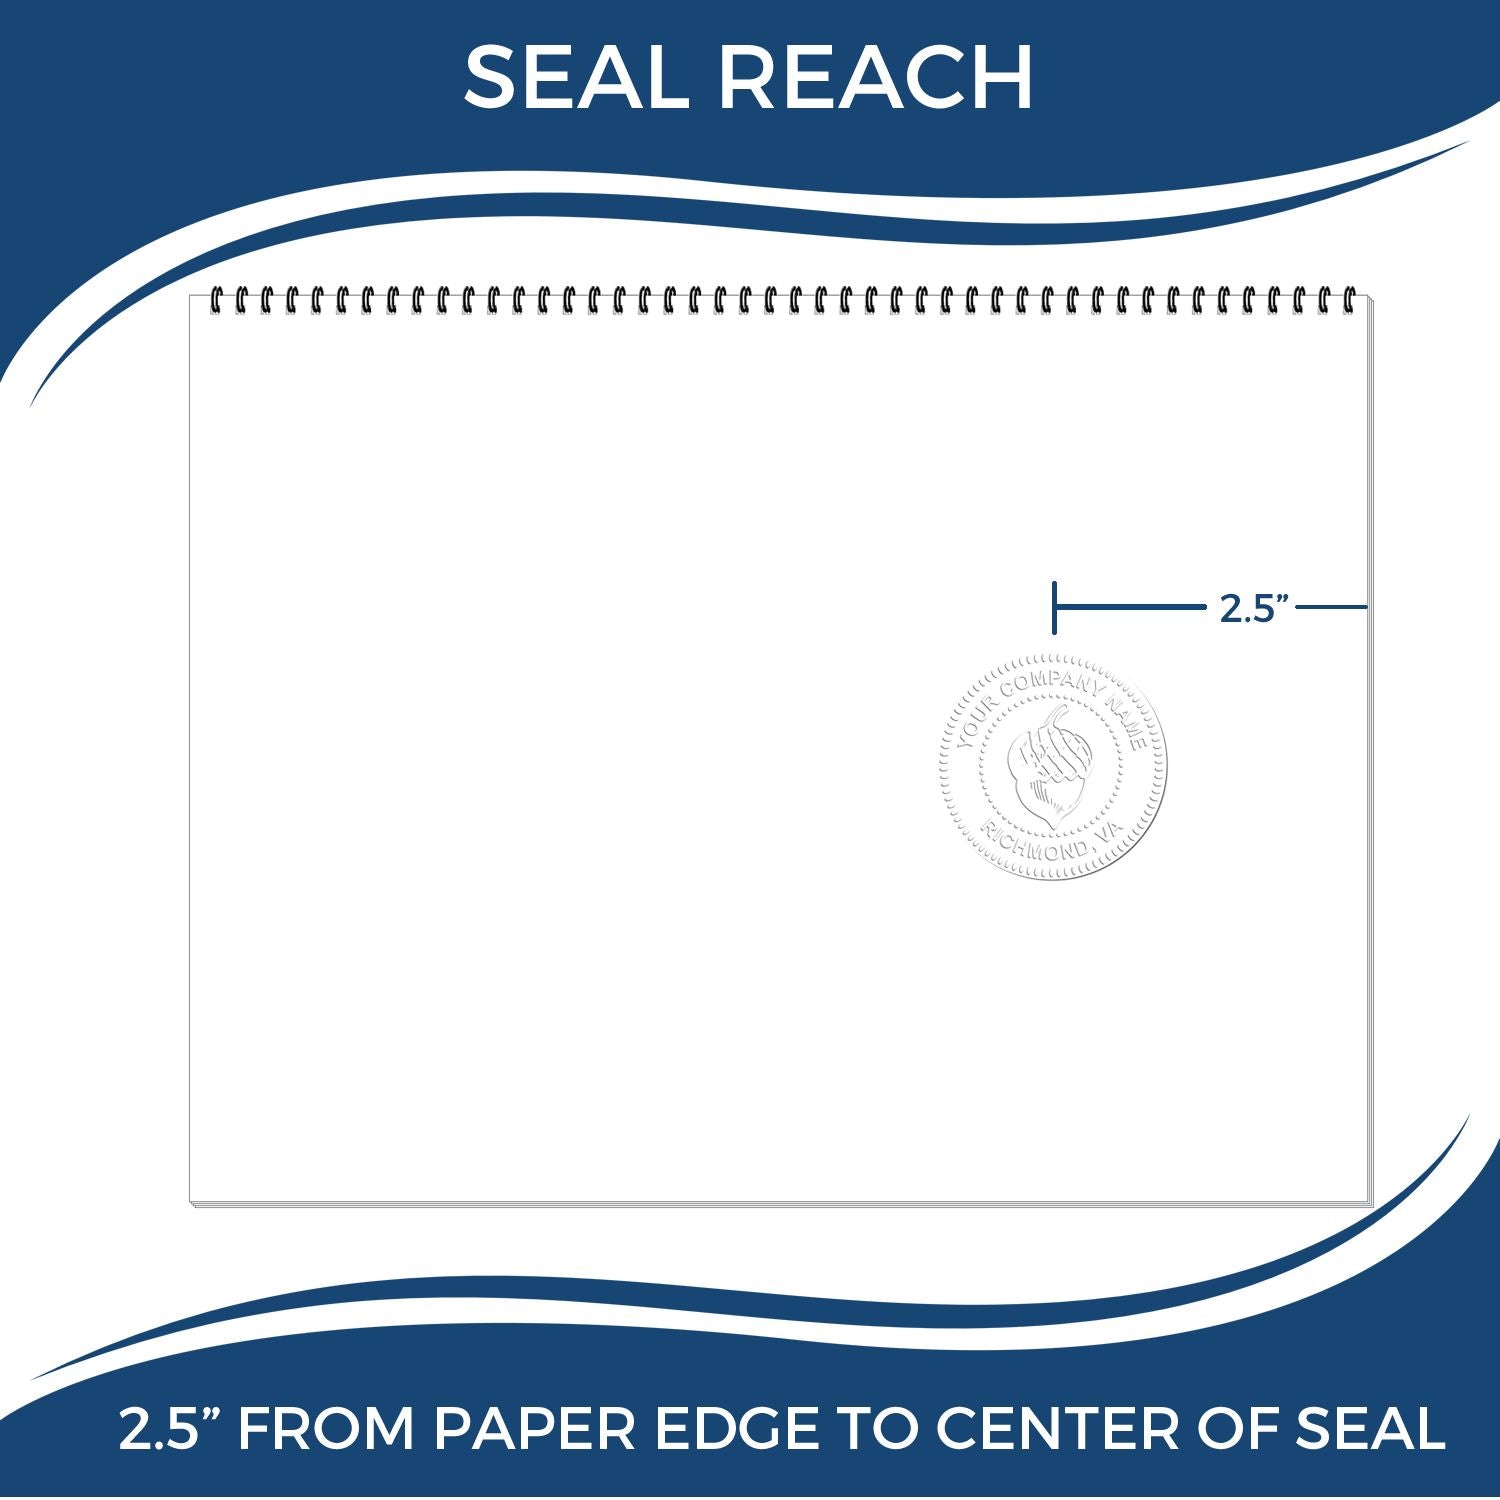 An infographic showing the seal reach which is represented by a ruler and a miniature seal image of the Long Reach District of Columbia PE Seal